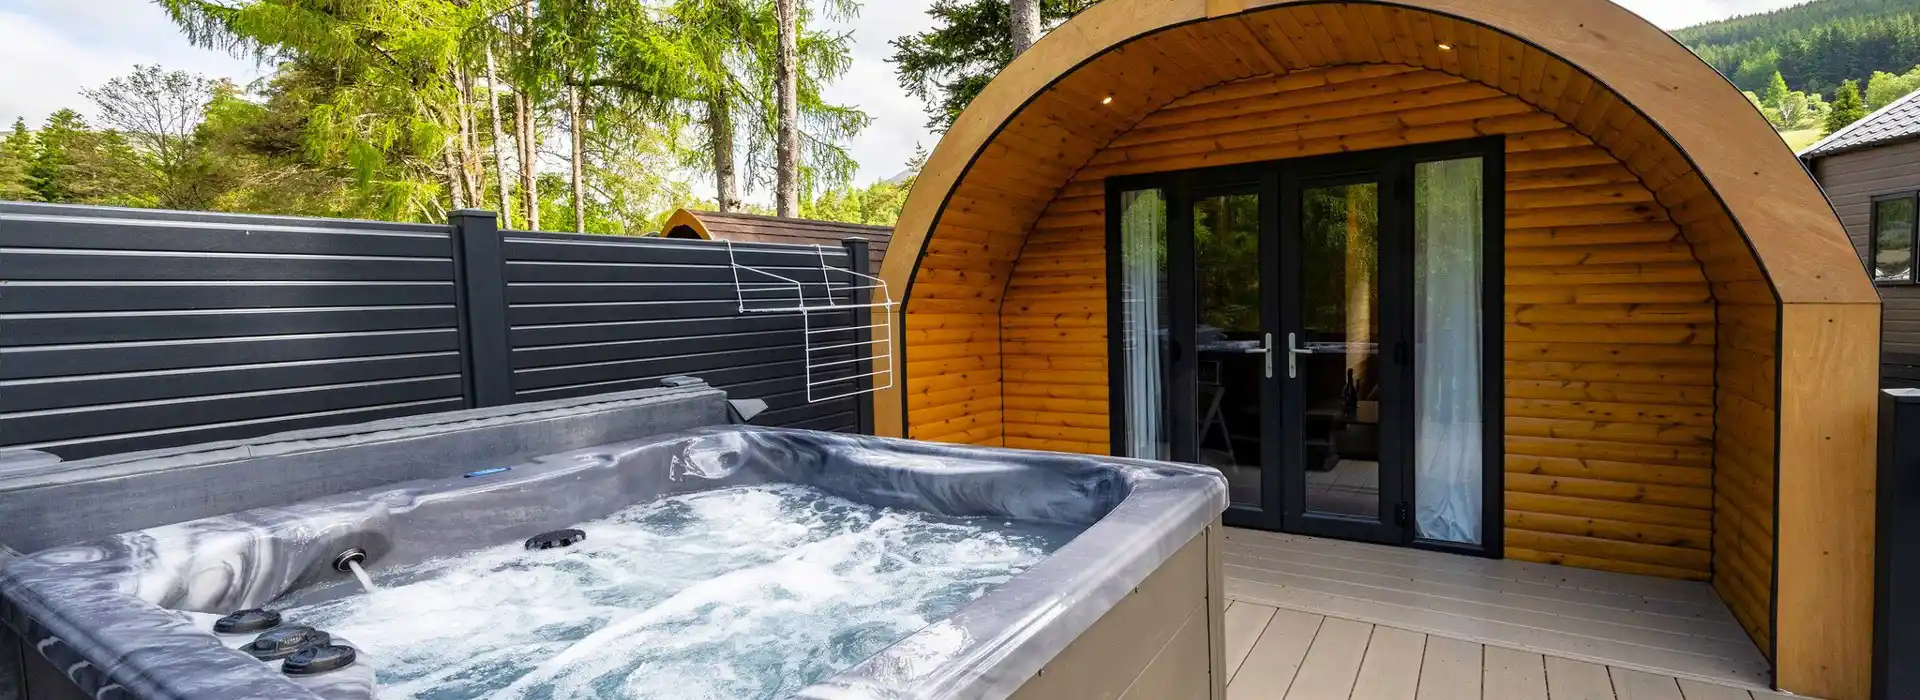 Camping and glamping pods in Loch Lomond and the Trossachs